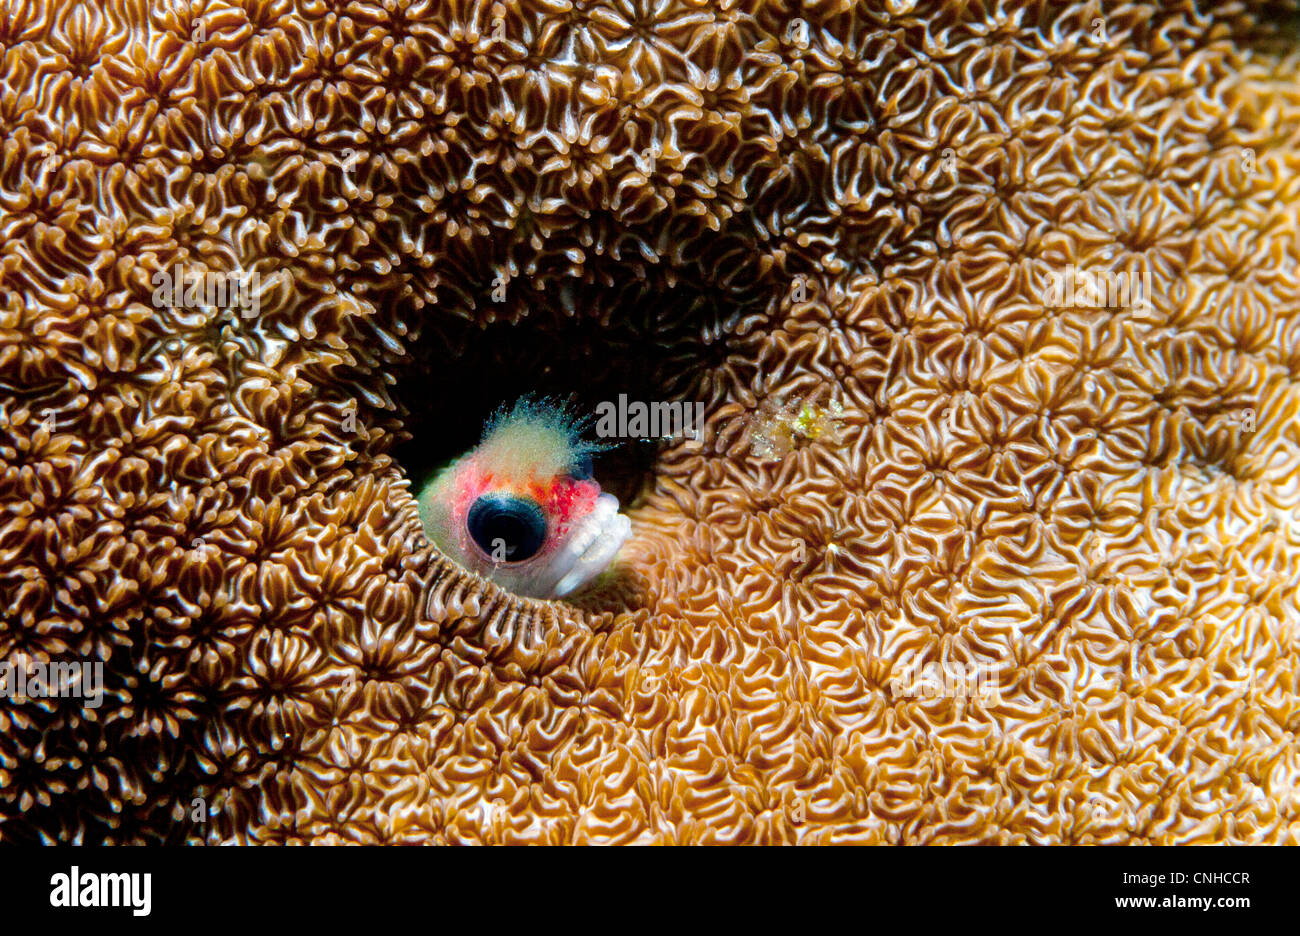 A blenny fish sticks its head out of a hole in a coral reef off the coast of Coiba, Panama. Stock Photo